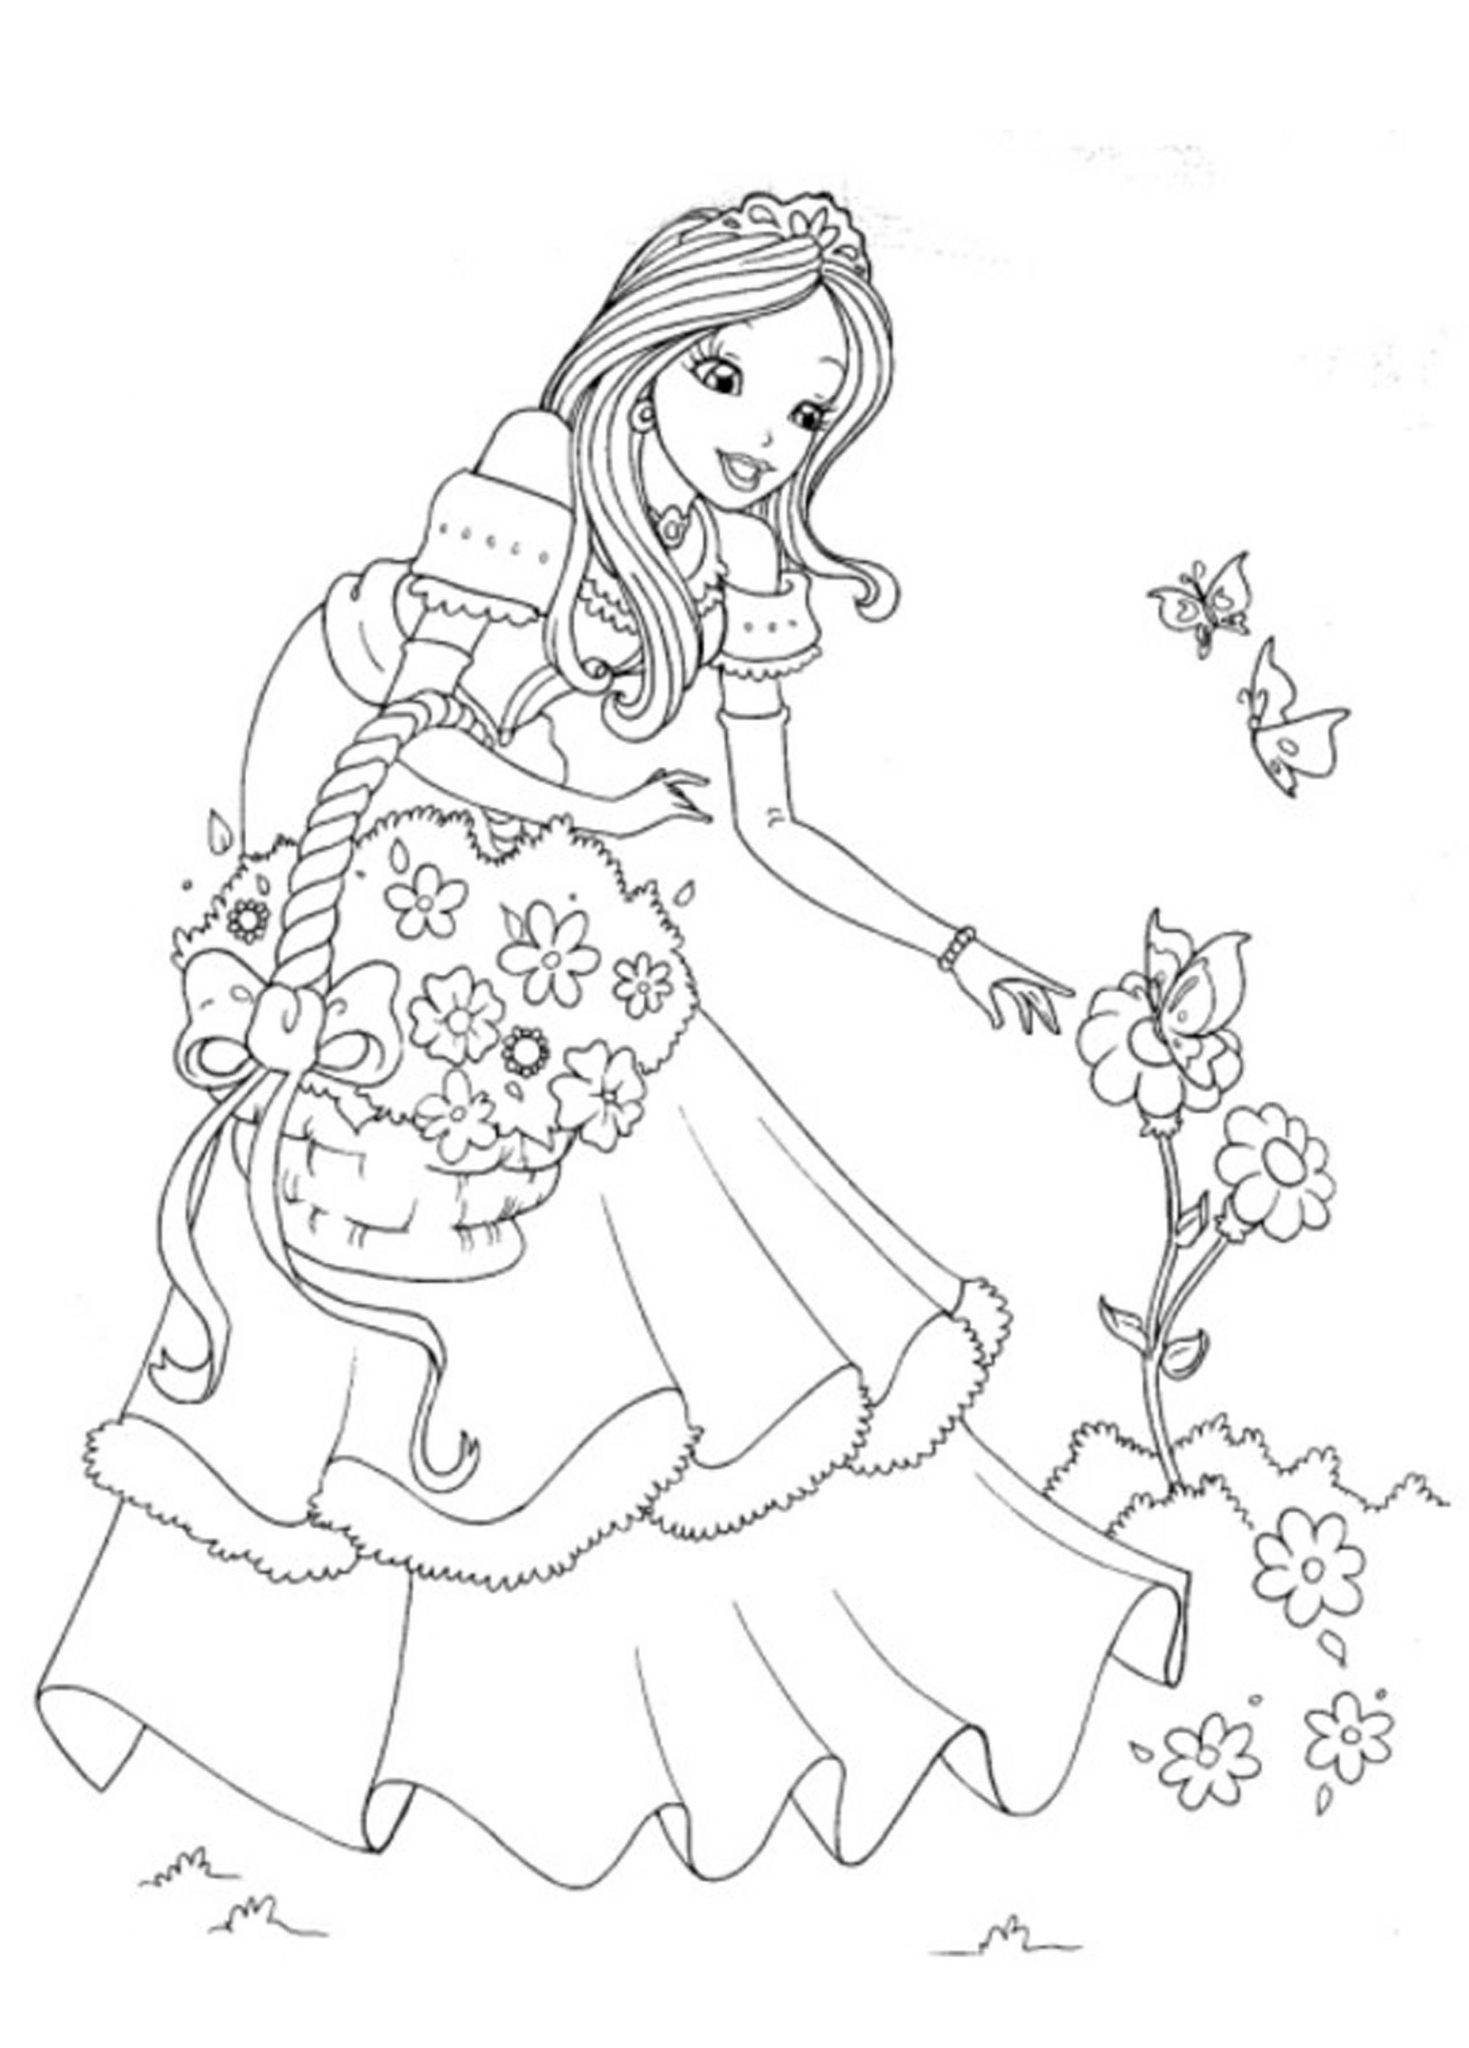 Print & Download Princess Coloring Pages, Support The